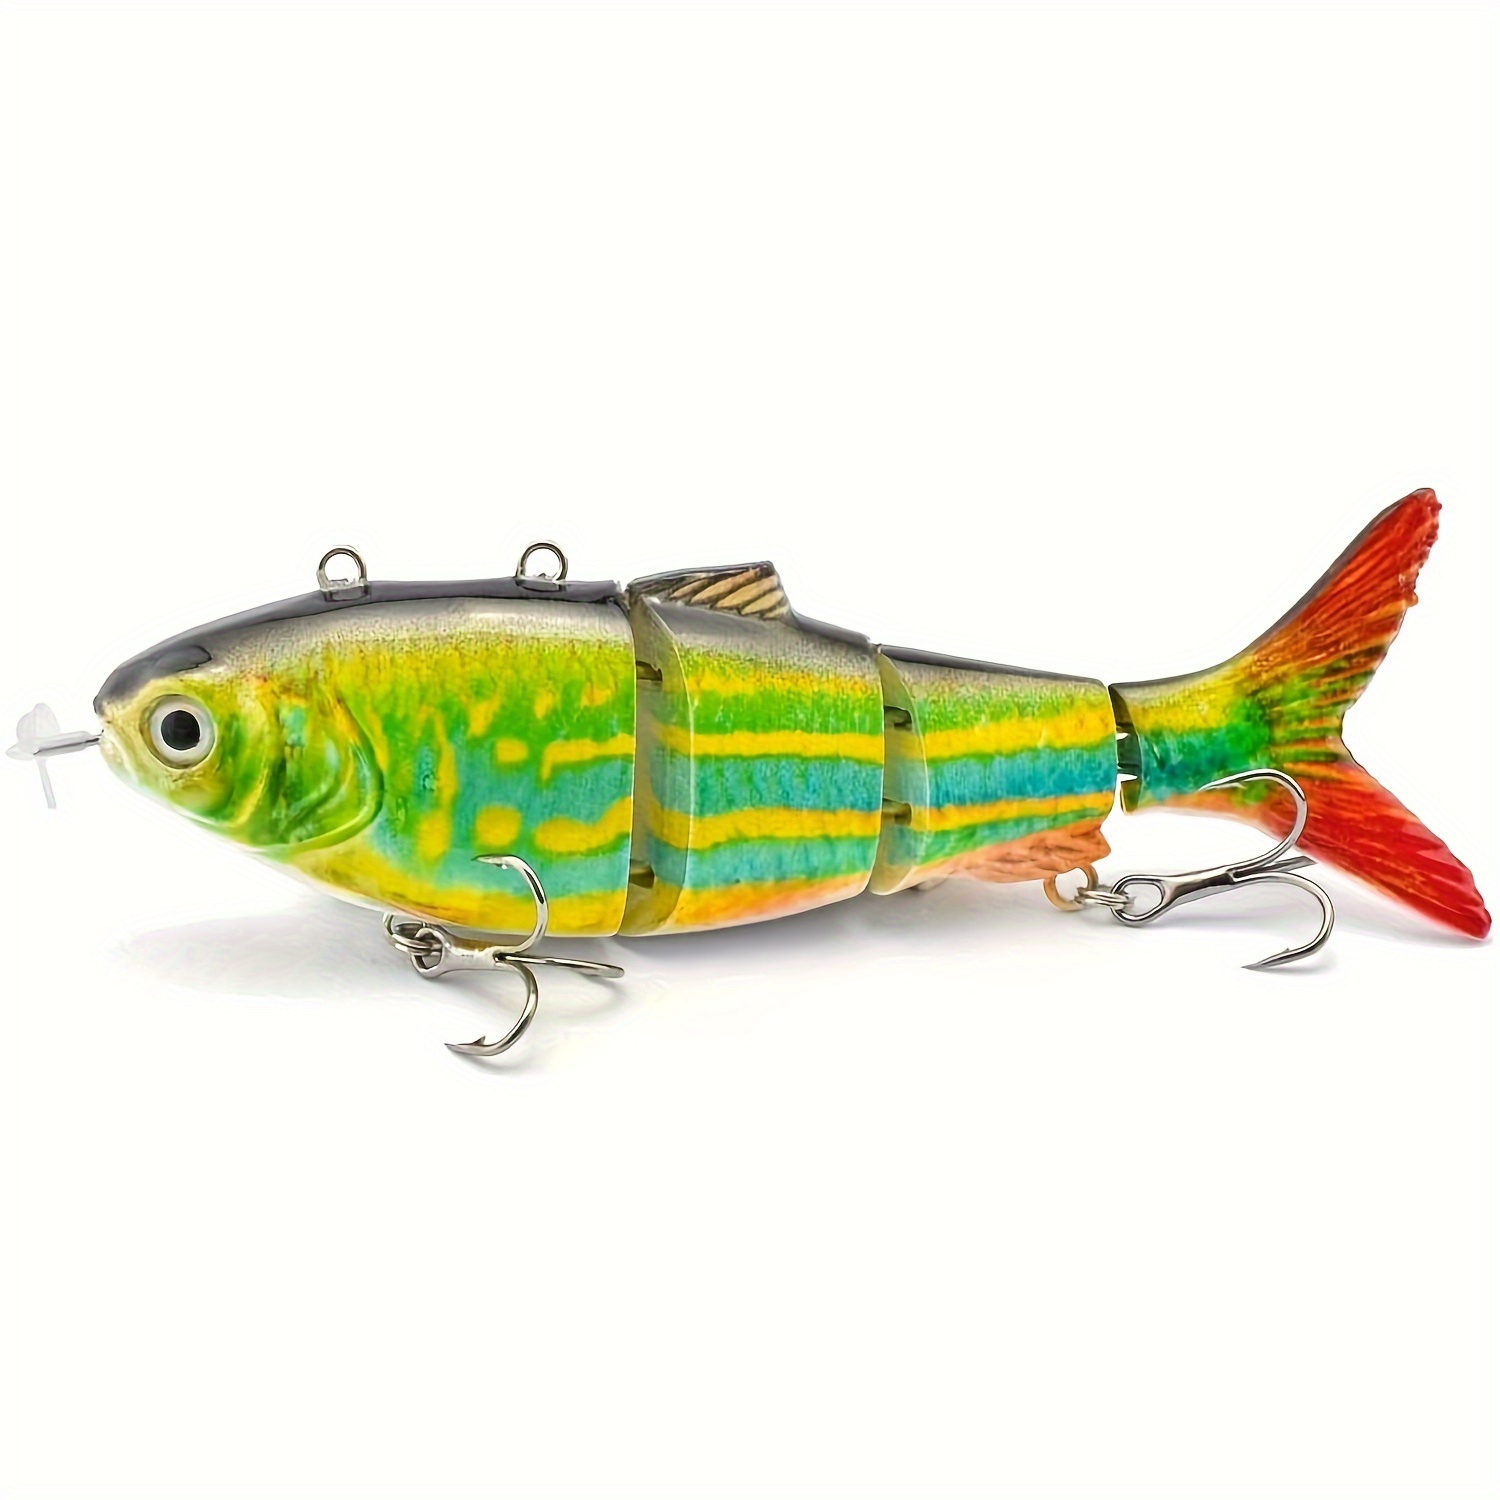 ods lure Electric Swimbait Fishing Lure Robotic Fish - Pike Frenzy